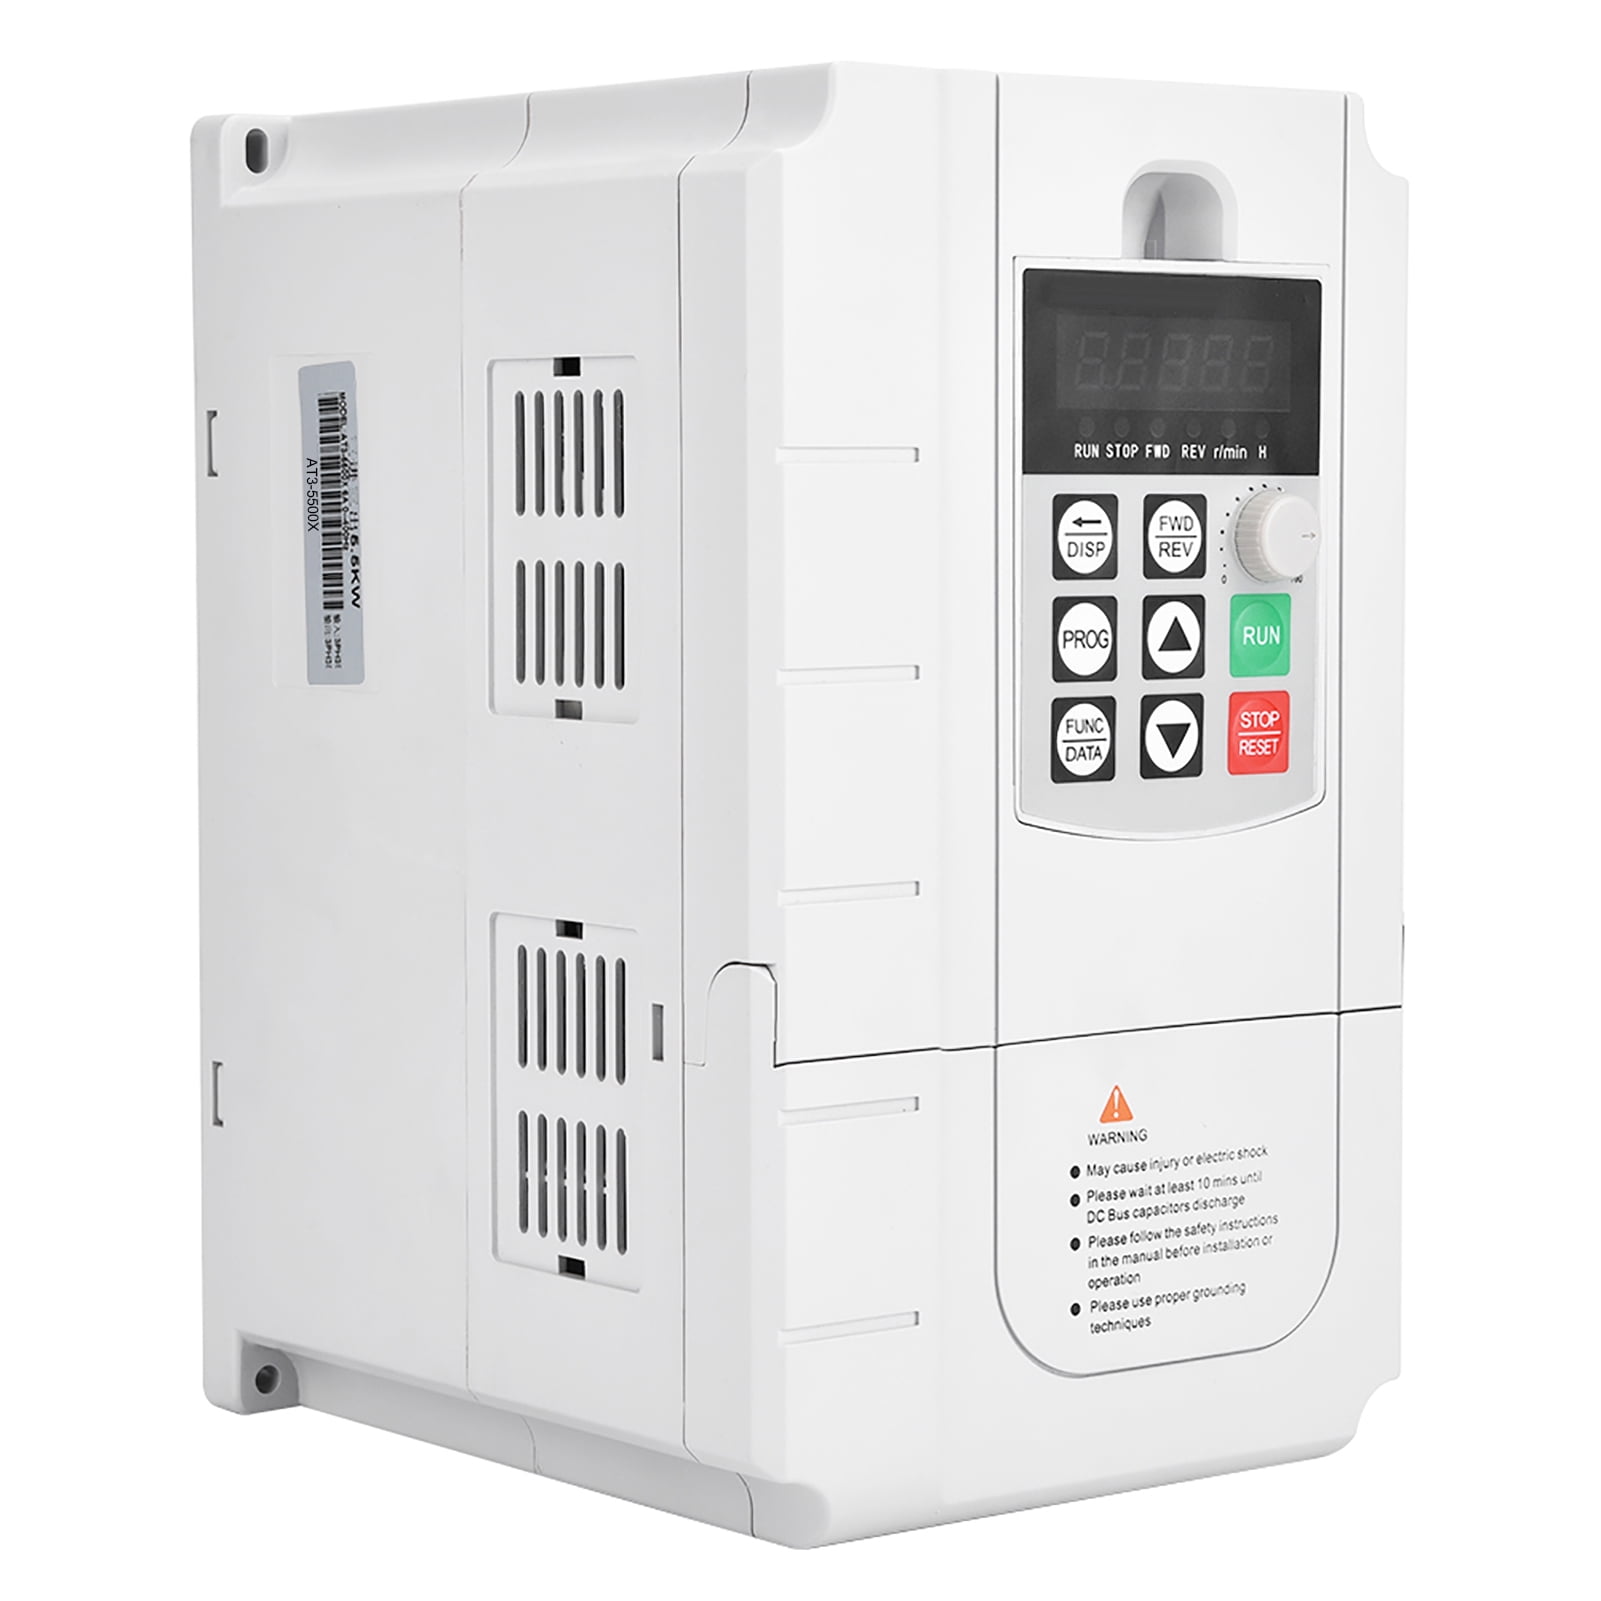 24.5 x 15 x 18.5cm 5.5KW 380V VF Control Ac Drive Frequency Inverter Three-Phase Input And Output 